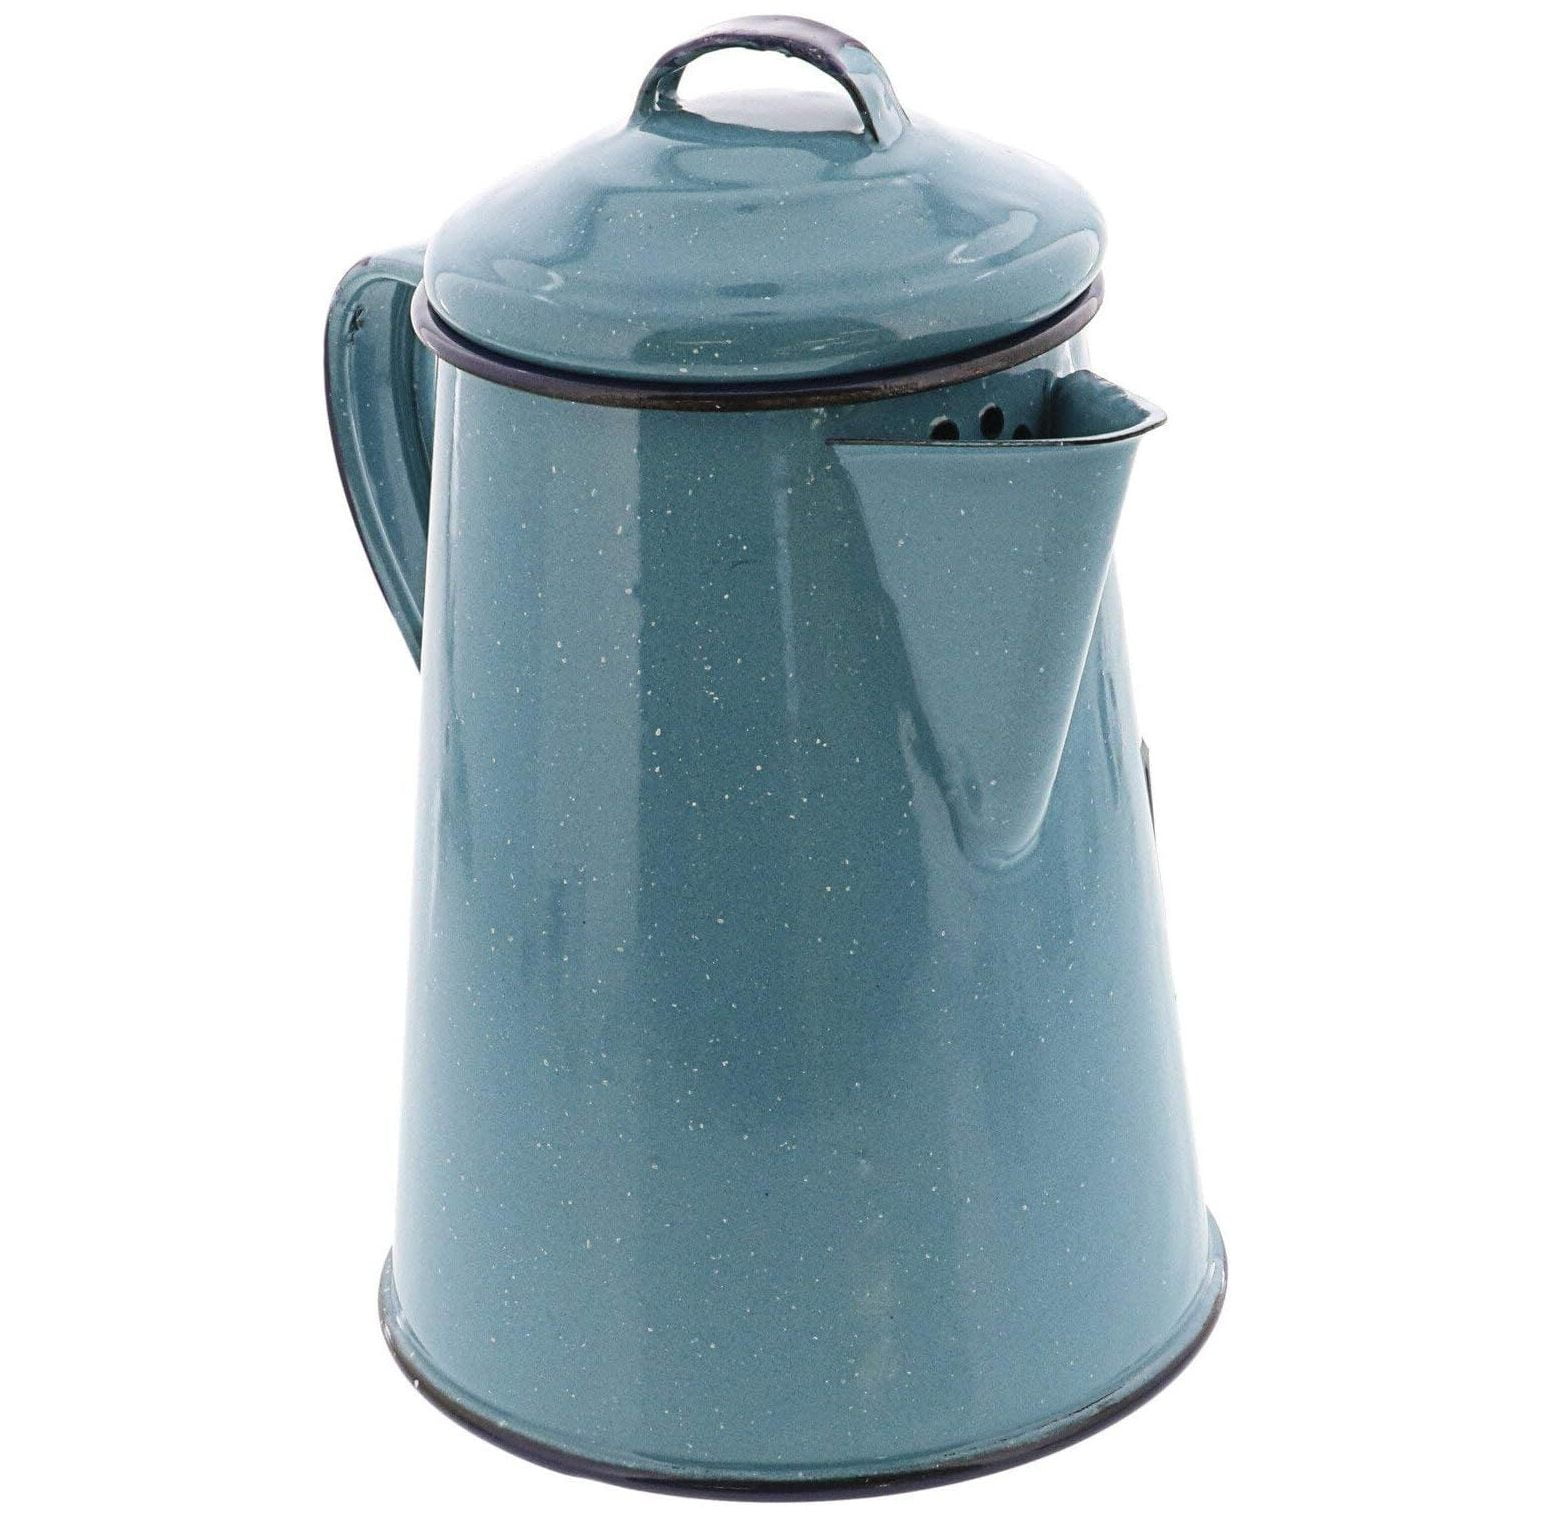 NeosKon Enamelware Coffee Pot (Turquoise Color) - 6 Cups - Camping - Hot  Water for Coffee and Tea - Light and Resistant